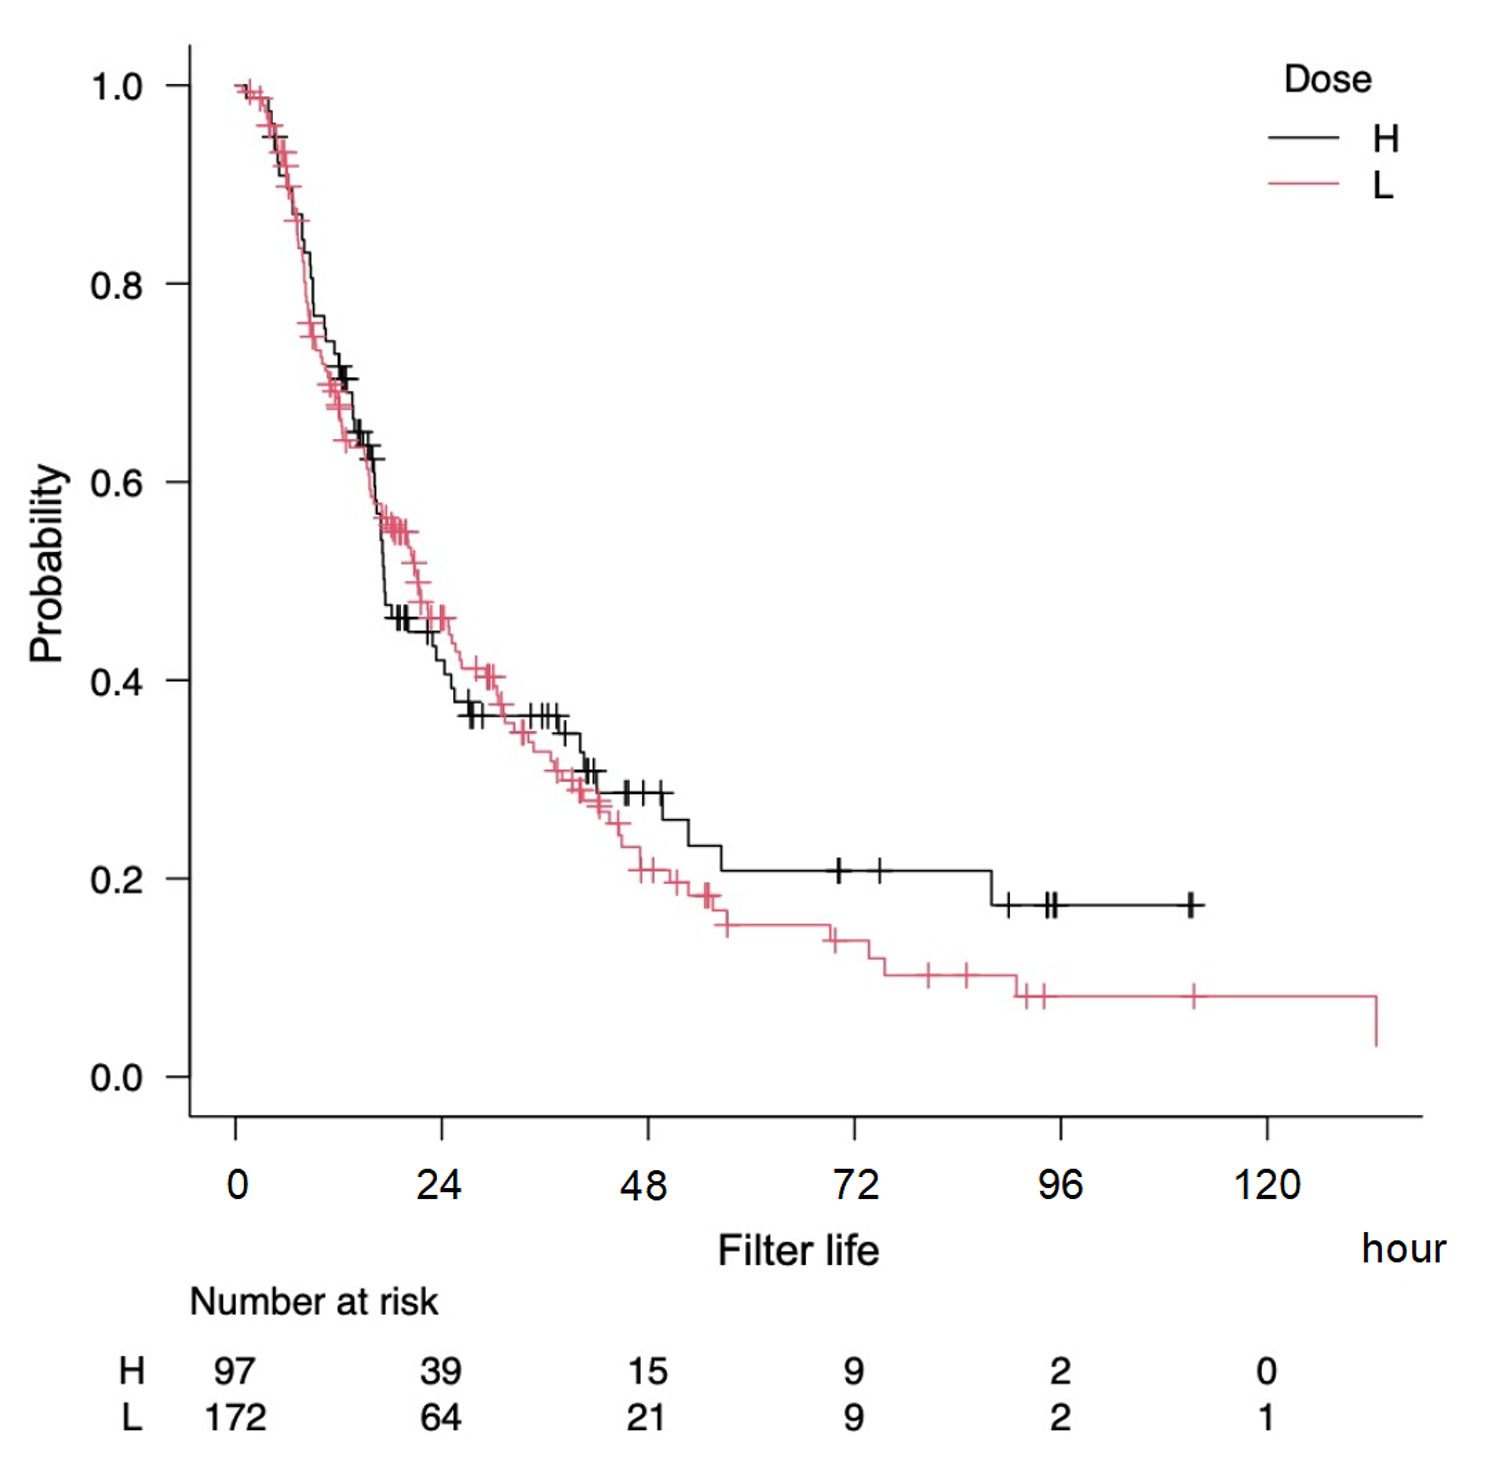 Dose of nafamostat mesylate during continuous kidney replacement therapy in critically ill patients: a two-centre observational study